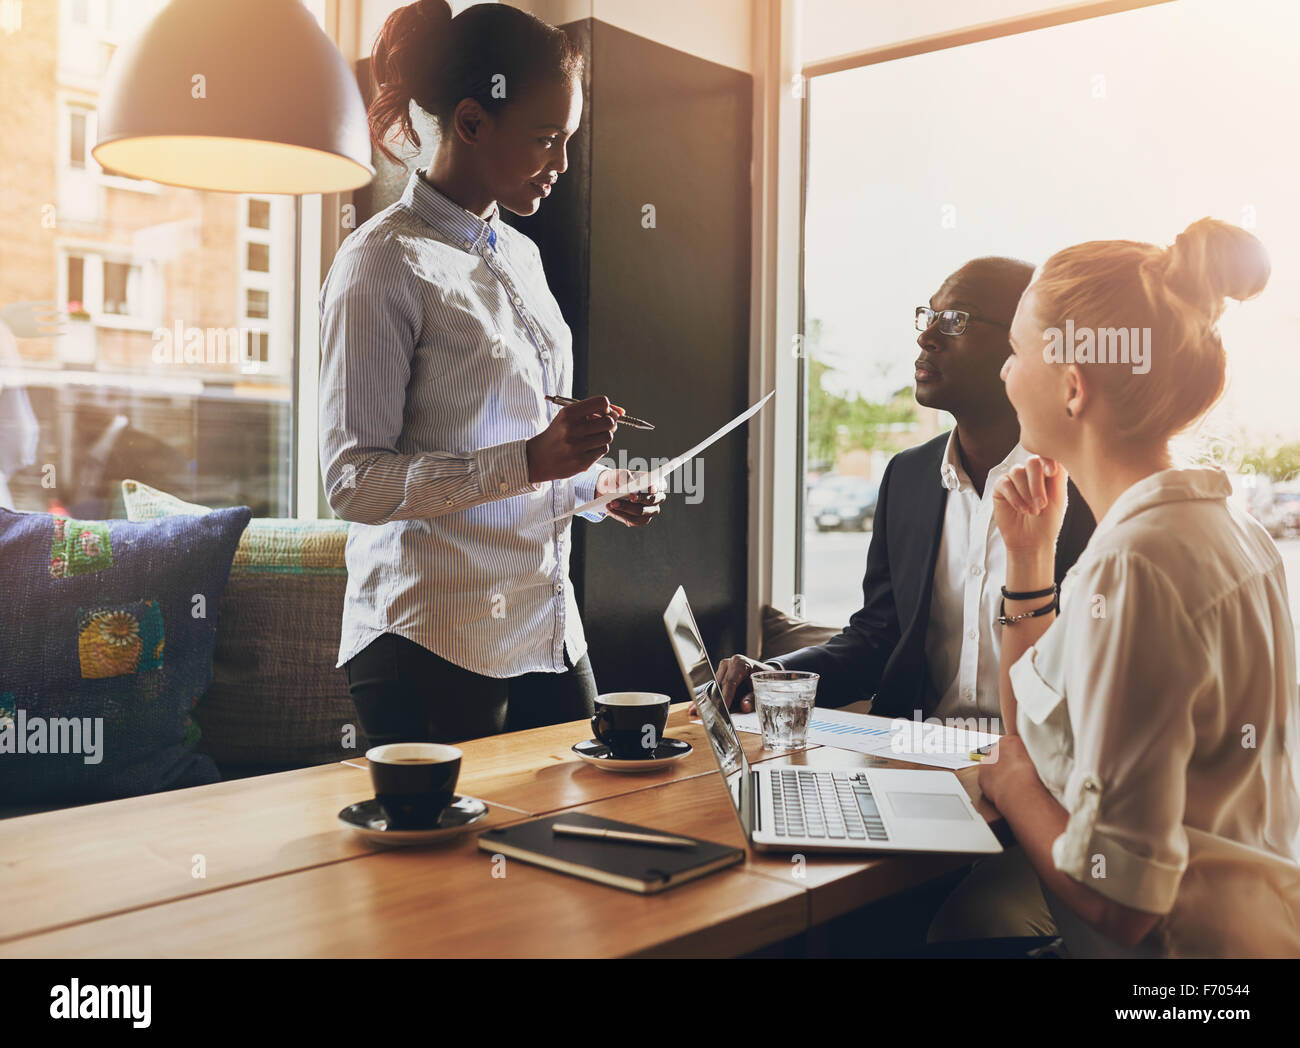 Business people at a meeting, small group, multi ethnic business, entrepreneur concept Stock Photo